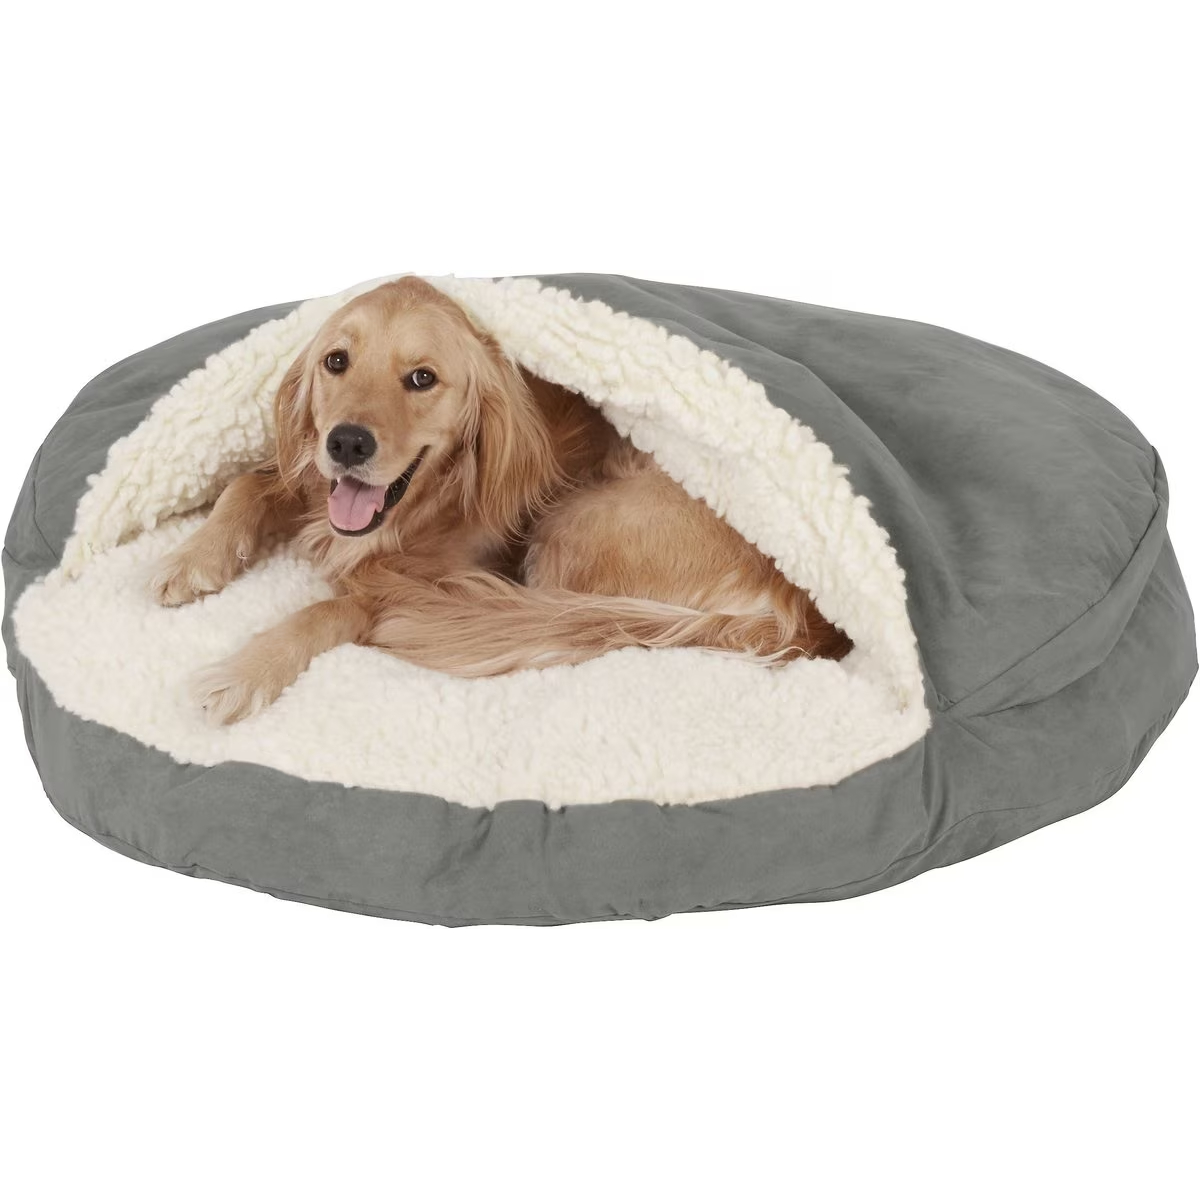 Snoozer Pet Products Luxury Microsuede Cozy Cave Dog & Cat Bed